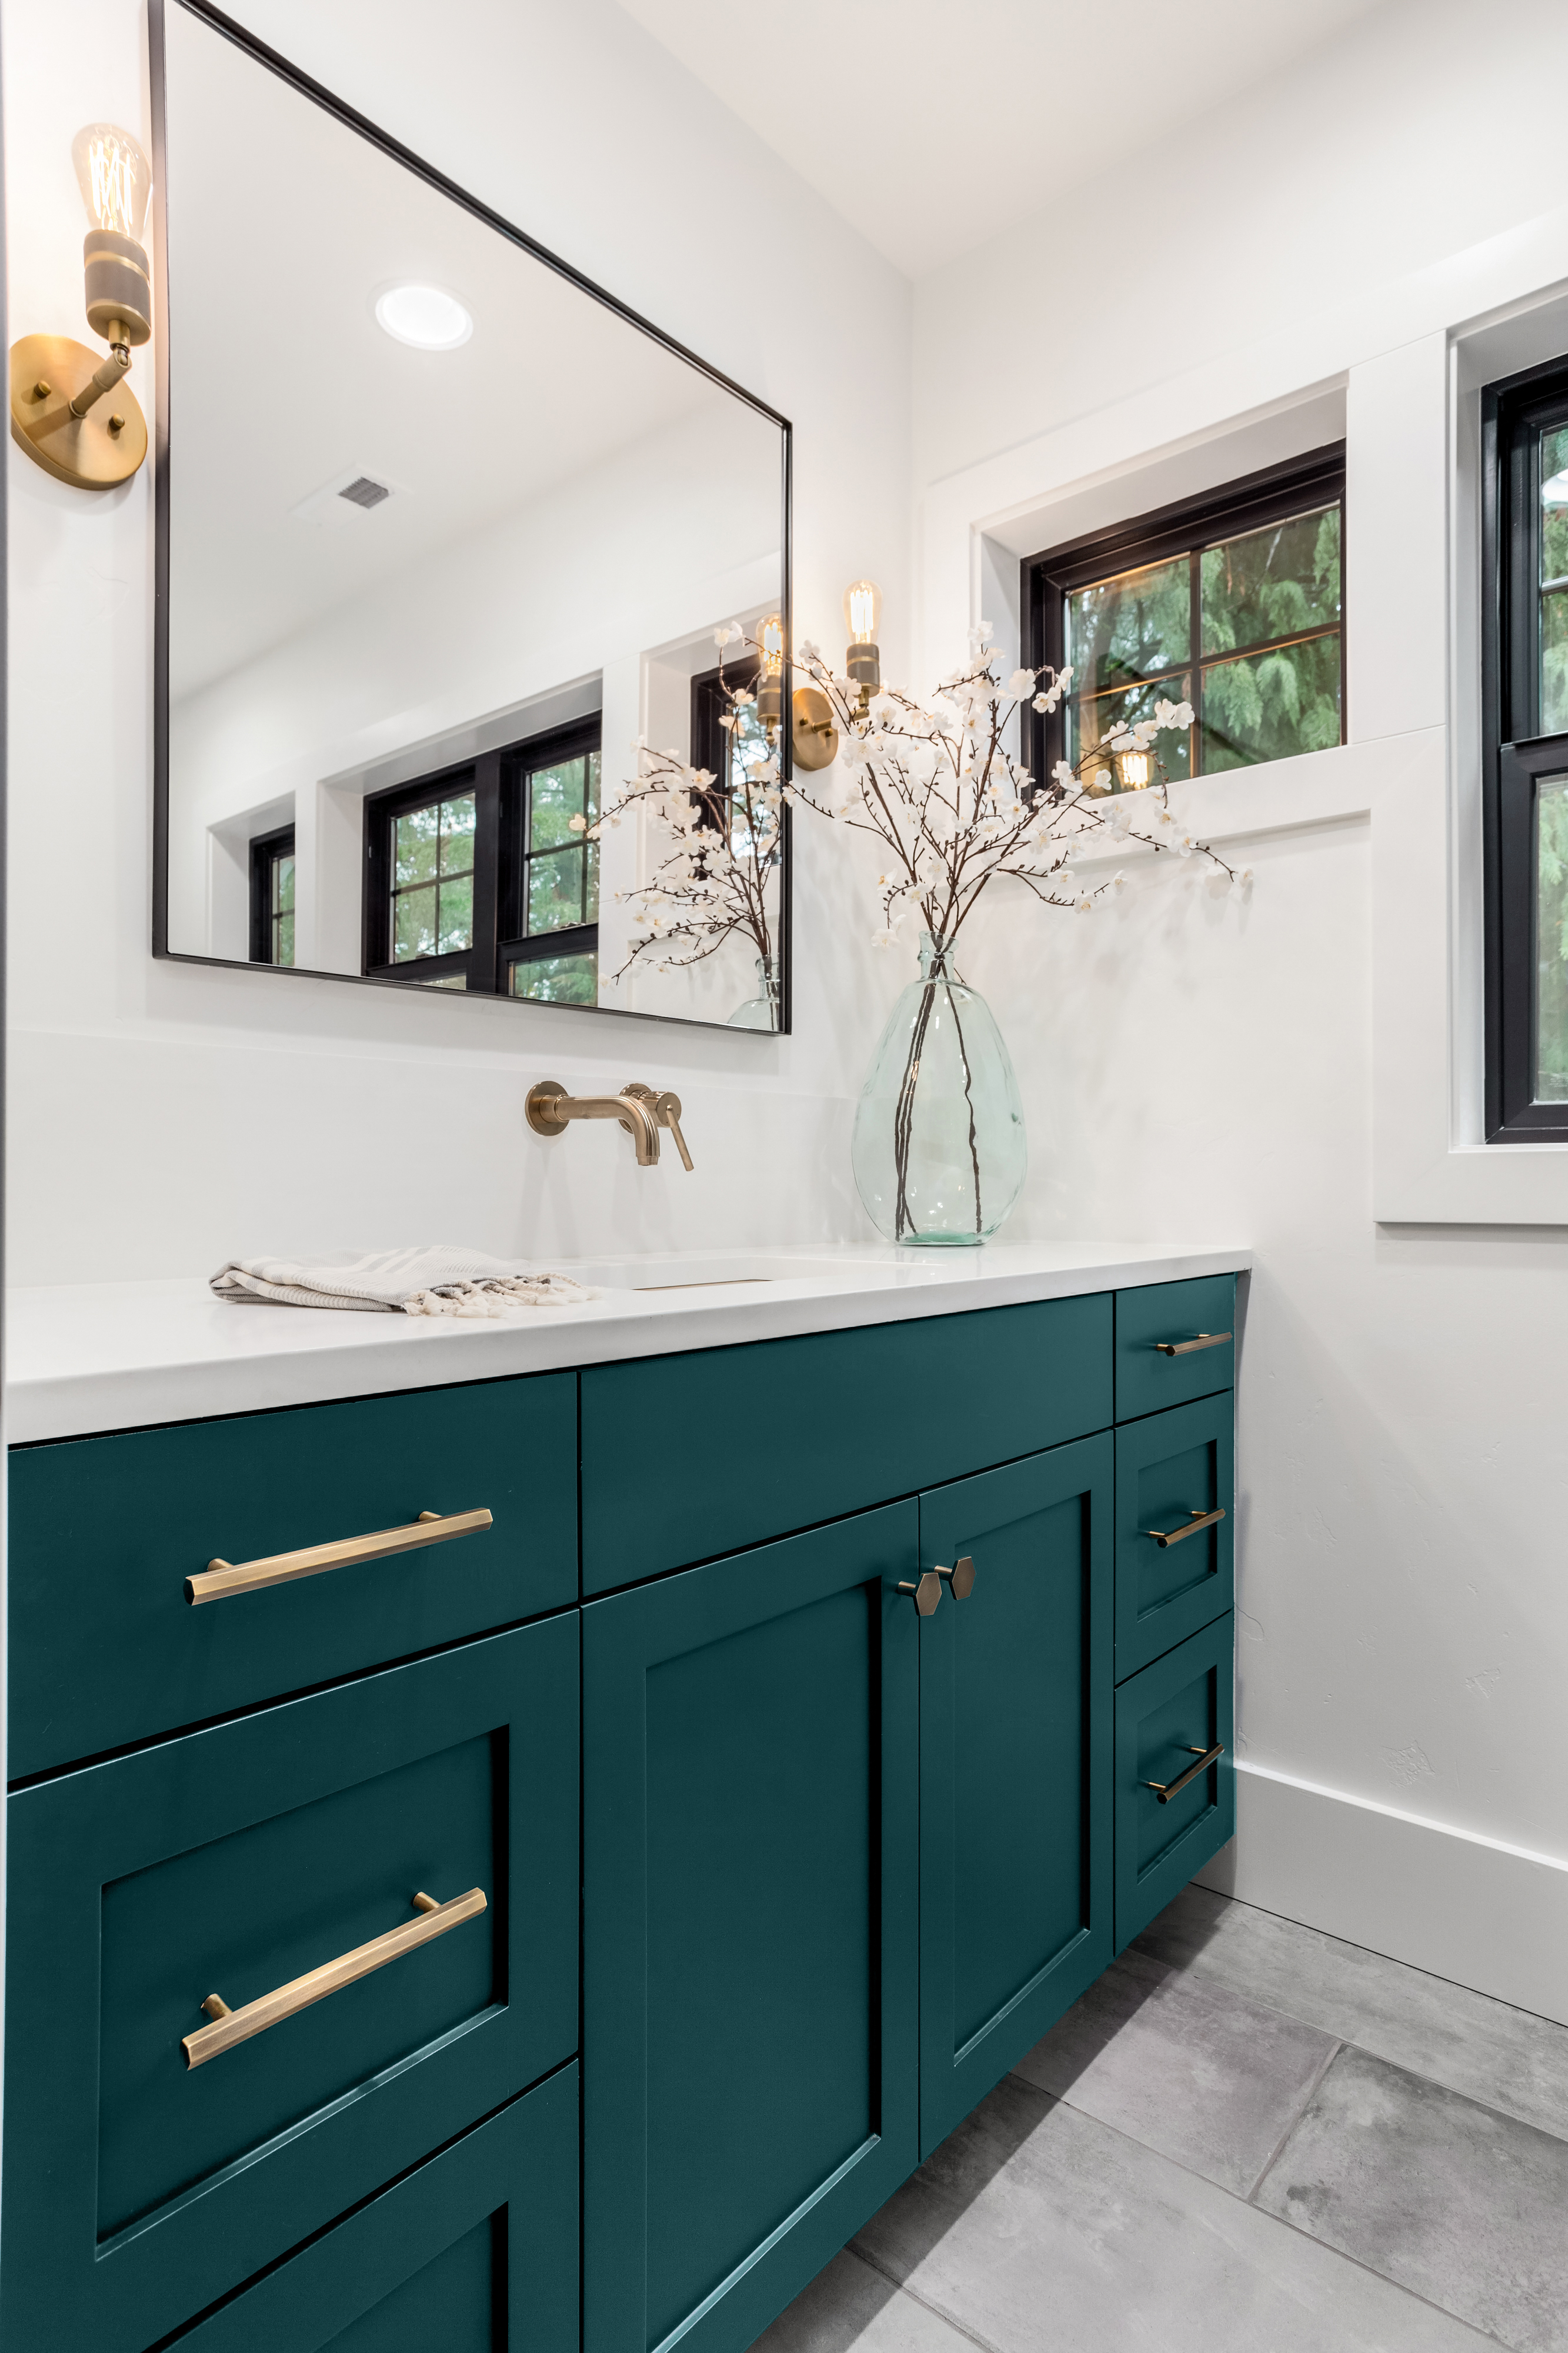 A bathroom with beautiful cabinets and finishes. The cabinet was painted in glossy deep teal color called Ocean Abyss. The hardware throughout  the cabinets is metallic gold or brassy colors.  